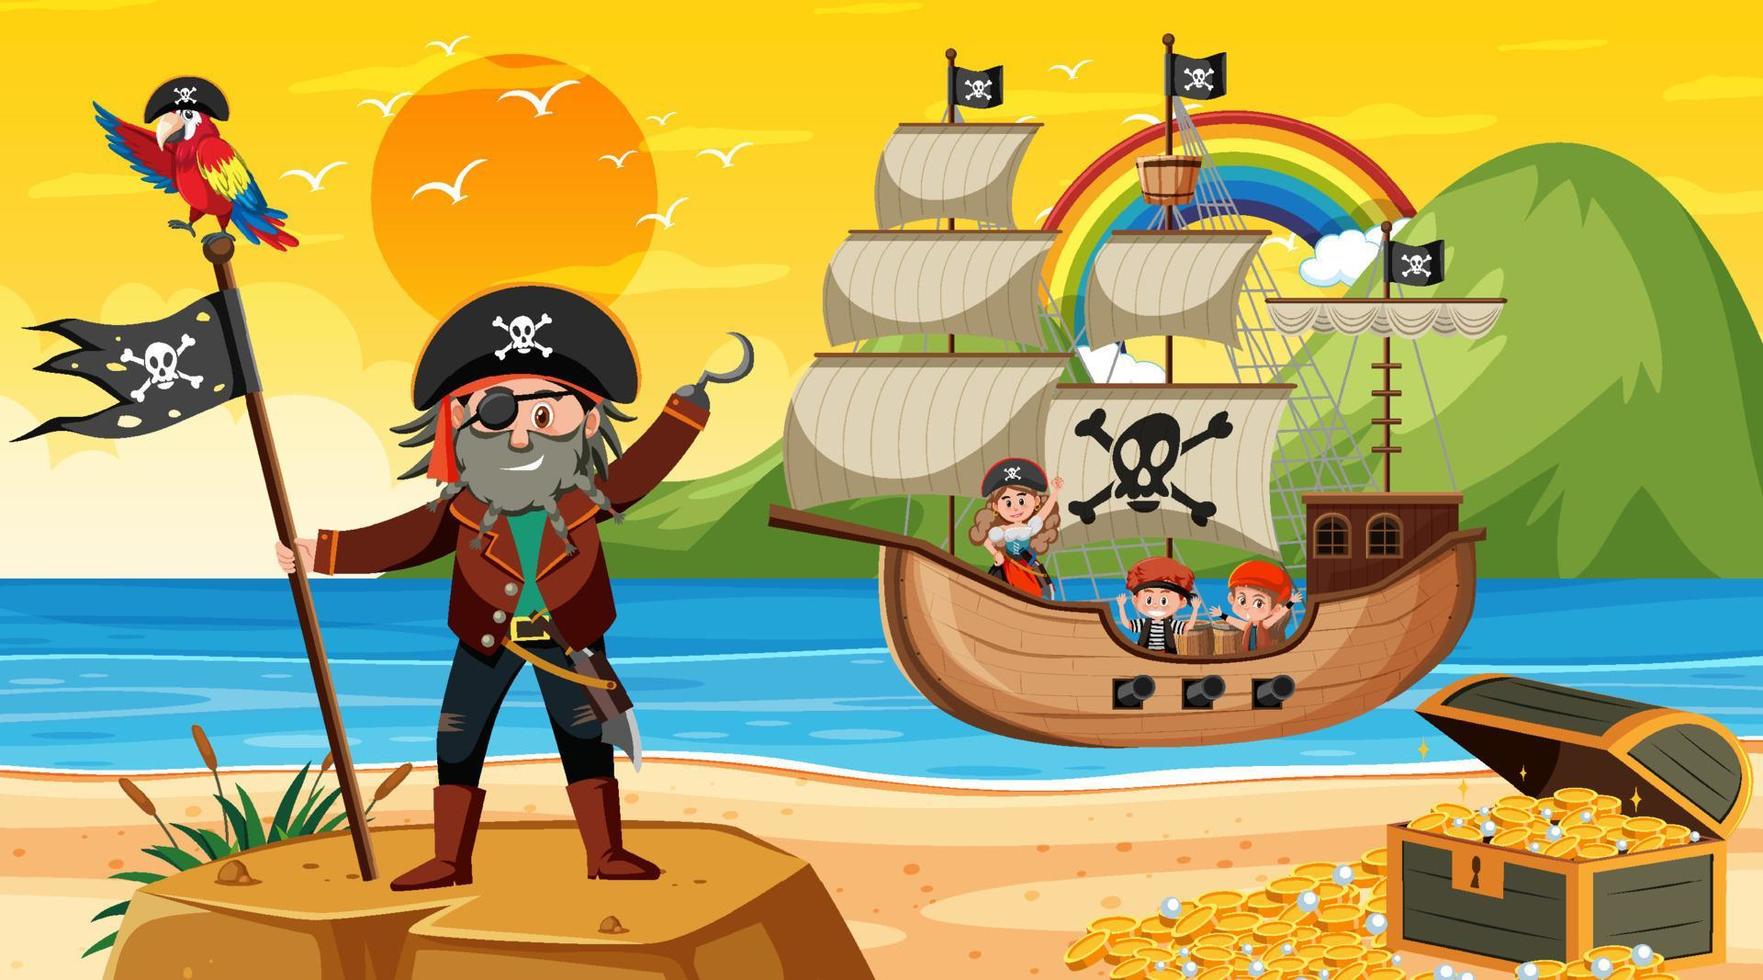 Beach at sunset time scene with pirate kids cartoon character on the ship vector